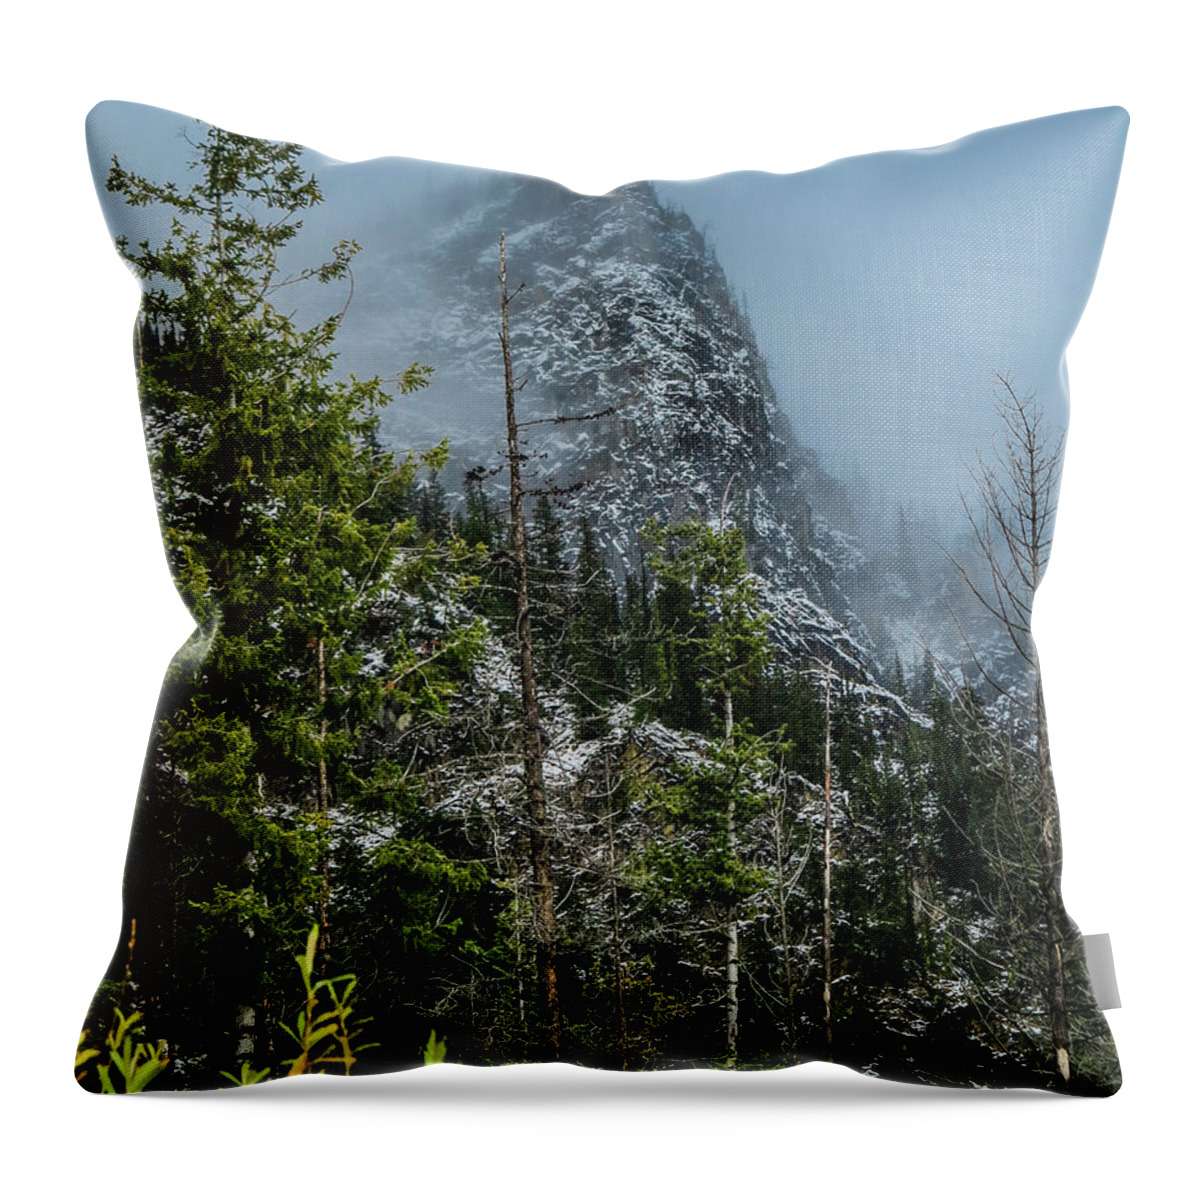 Landscape Throw Pillow featuring the photograph Misty Pinnacle by Jason Brooks